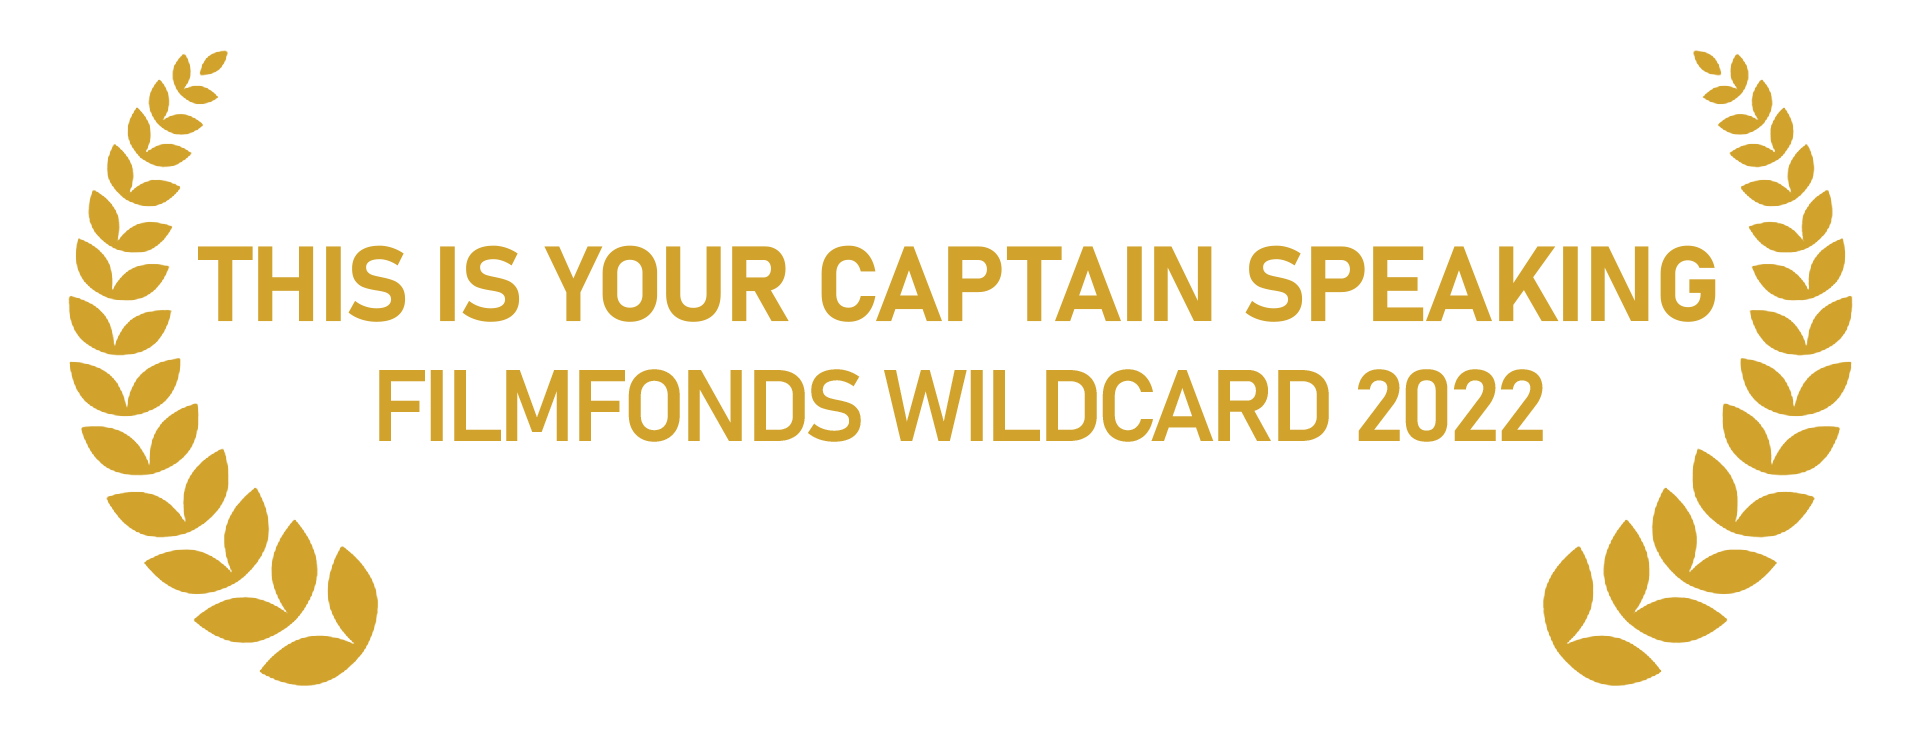 This Is Your Captain Speaking Film Fonds WildCard 2022